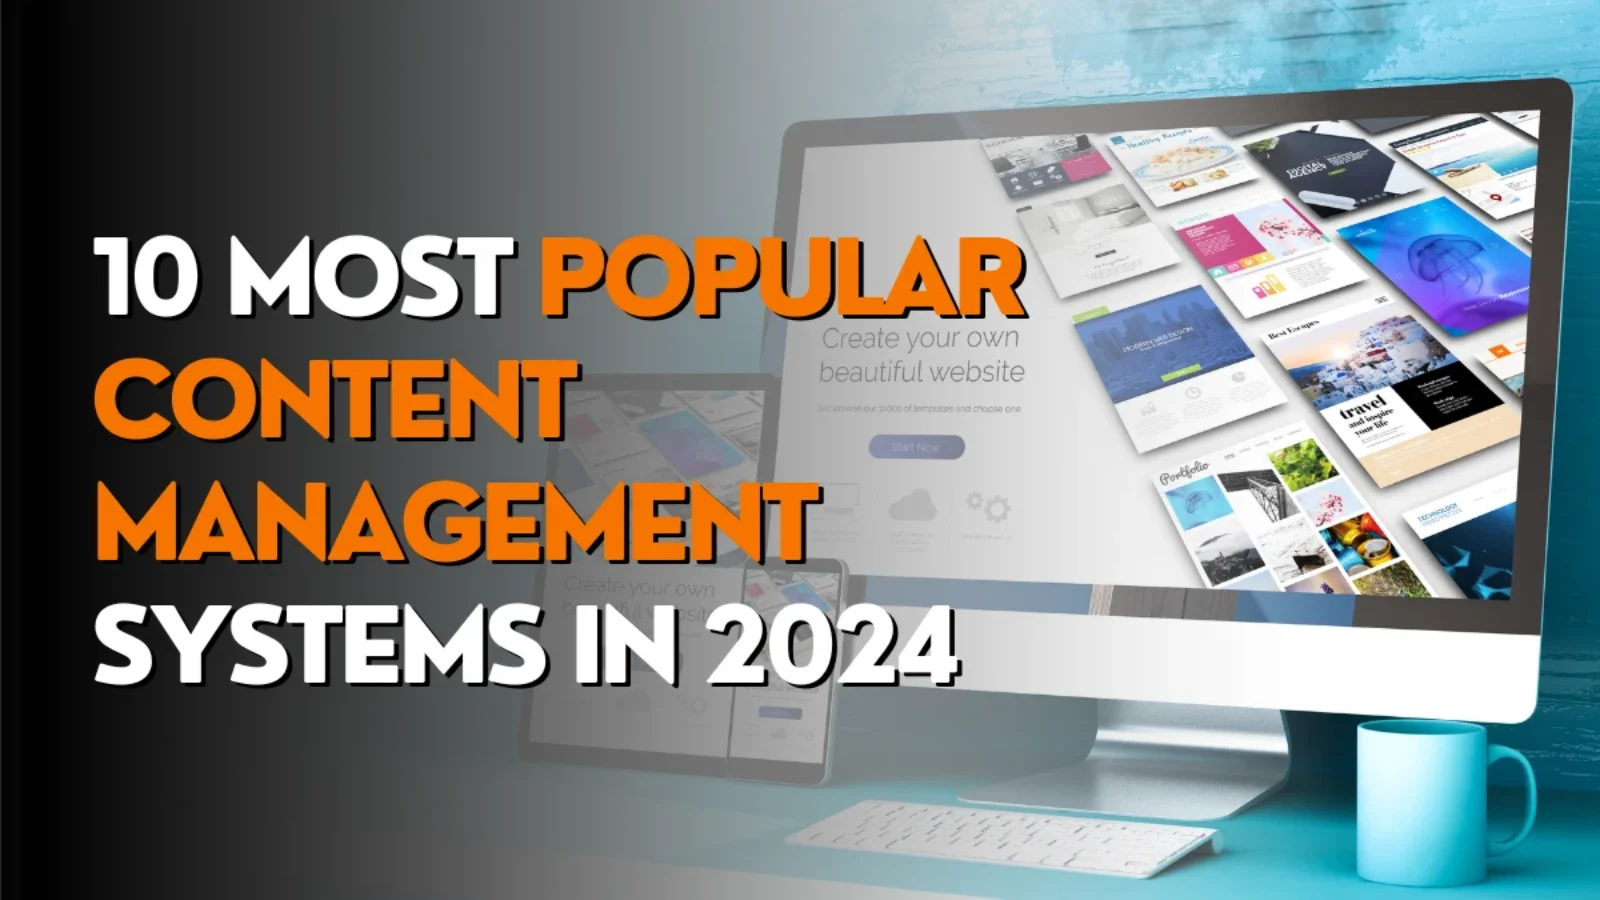 10 Most Popular Content Management Systems in 2024